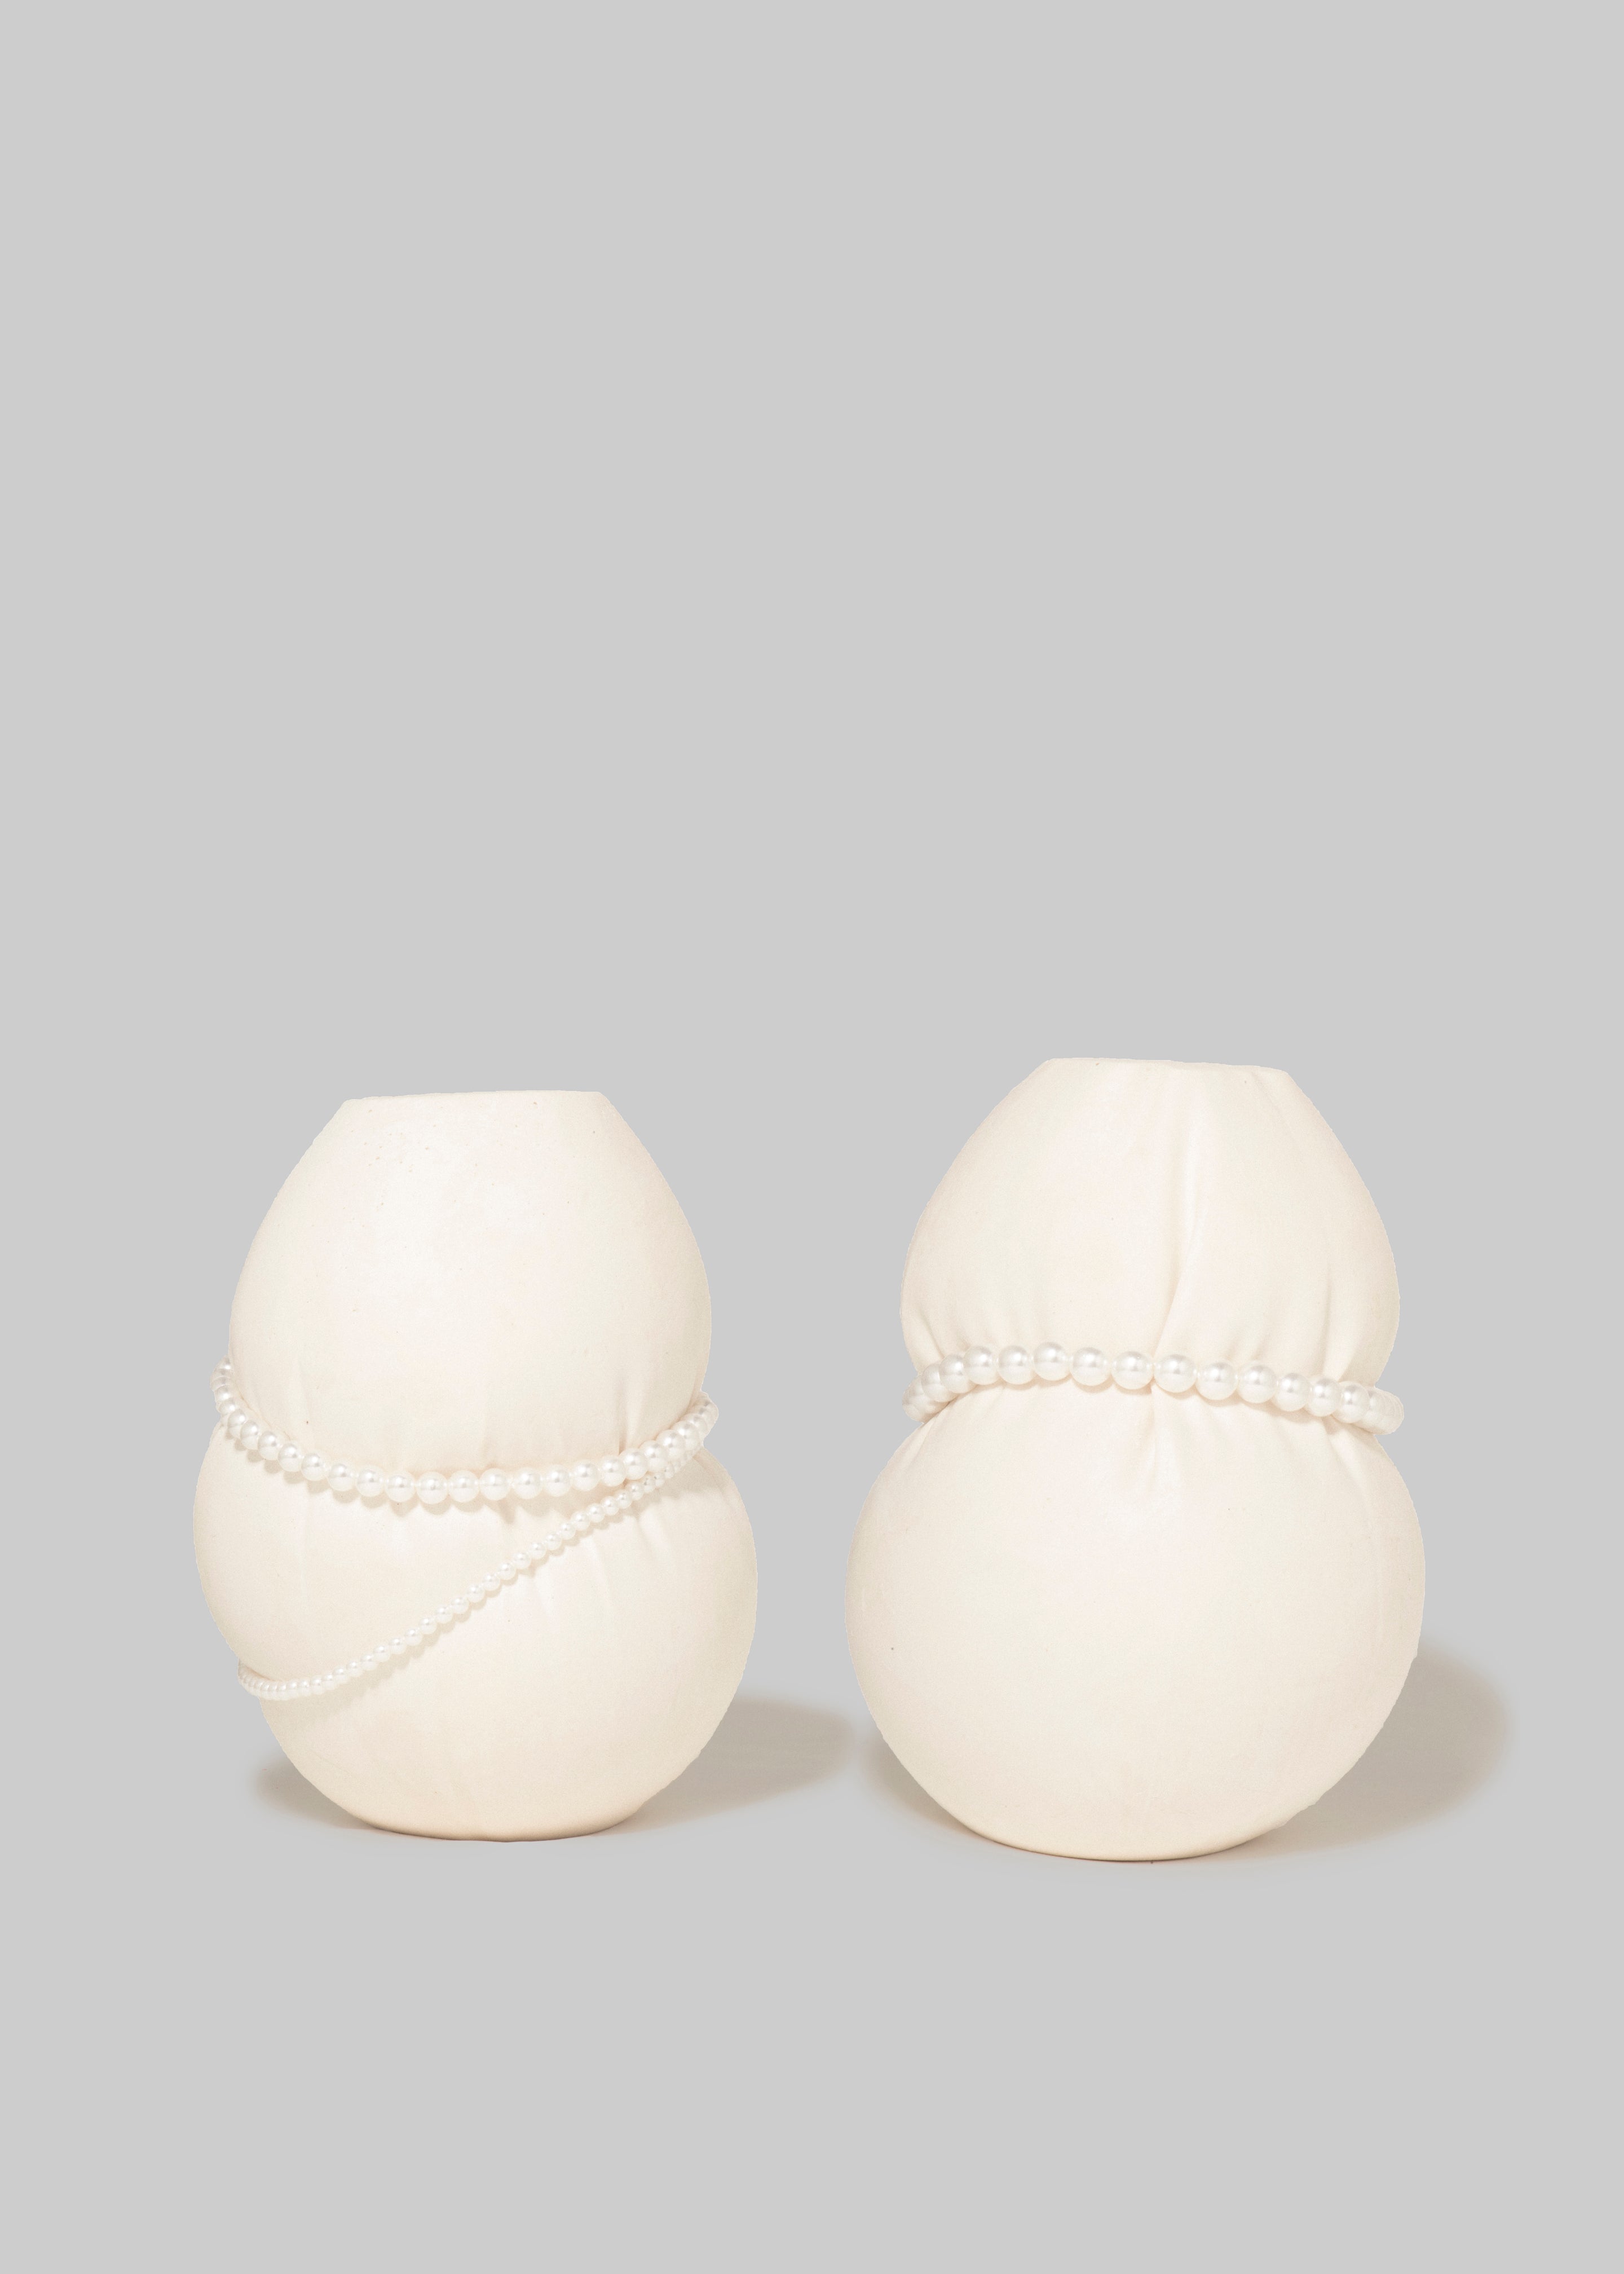 Completedworks B32 Set of Two Small Vessels - Matte White - 1